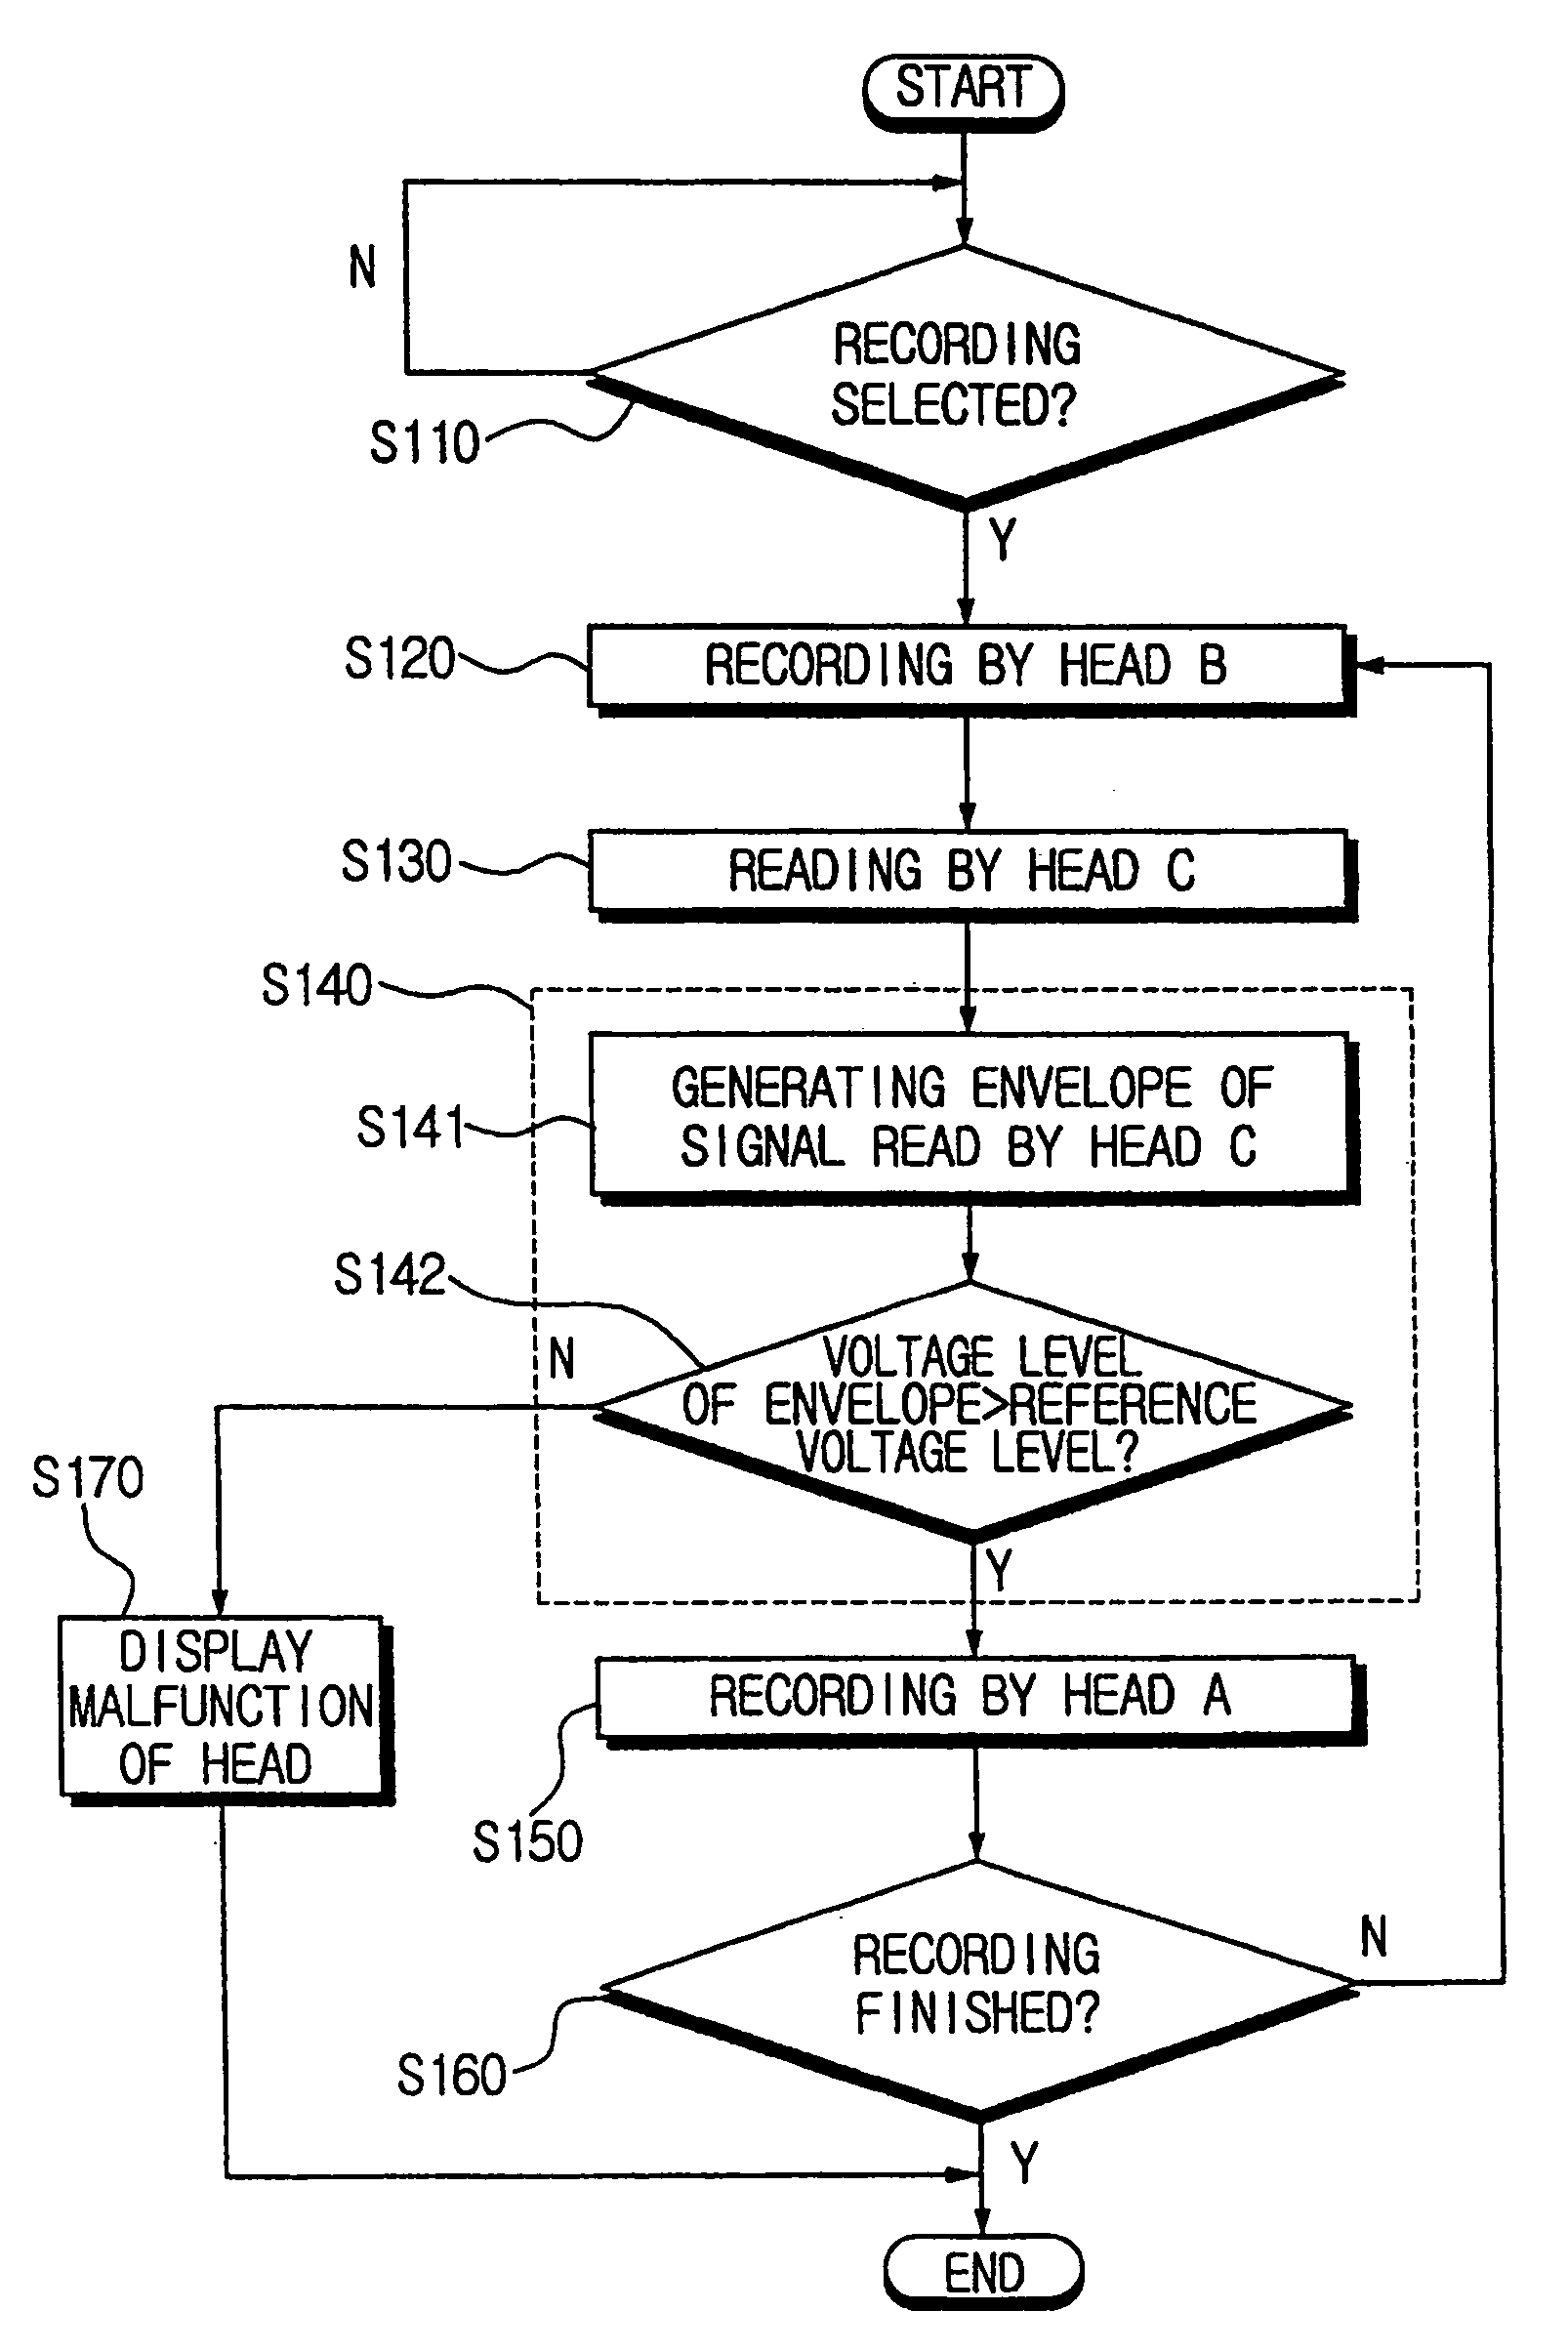 Apparatus and method for detecting an abnormality in a recorded signal